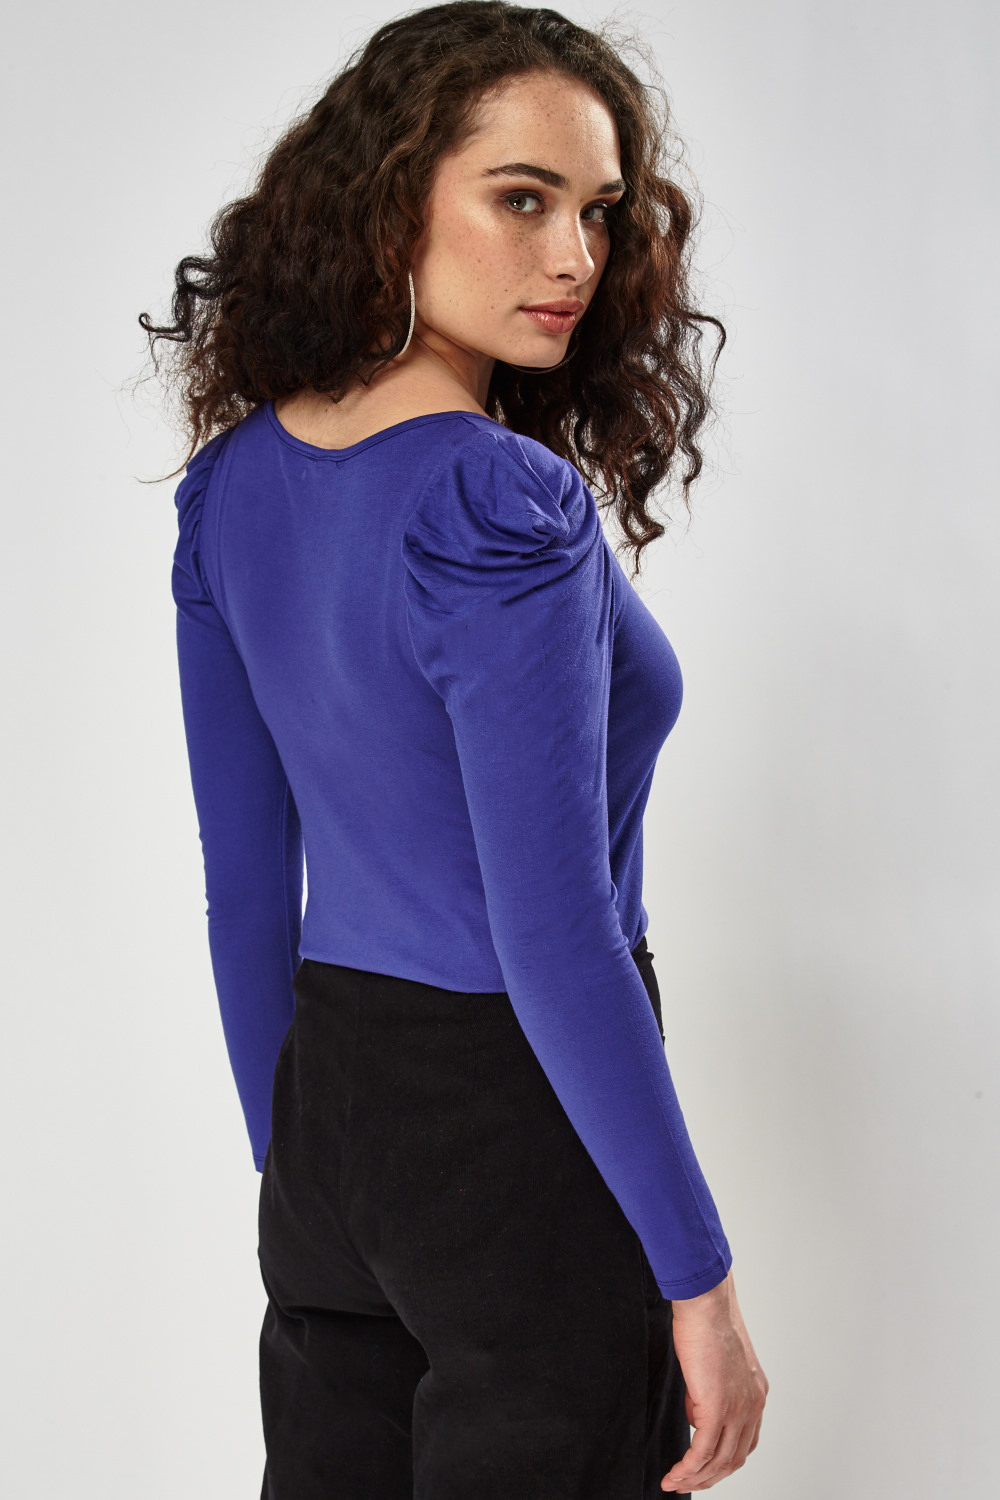 Ruched Sleeve Thin Top - Just $2